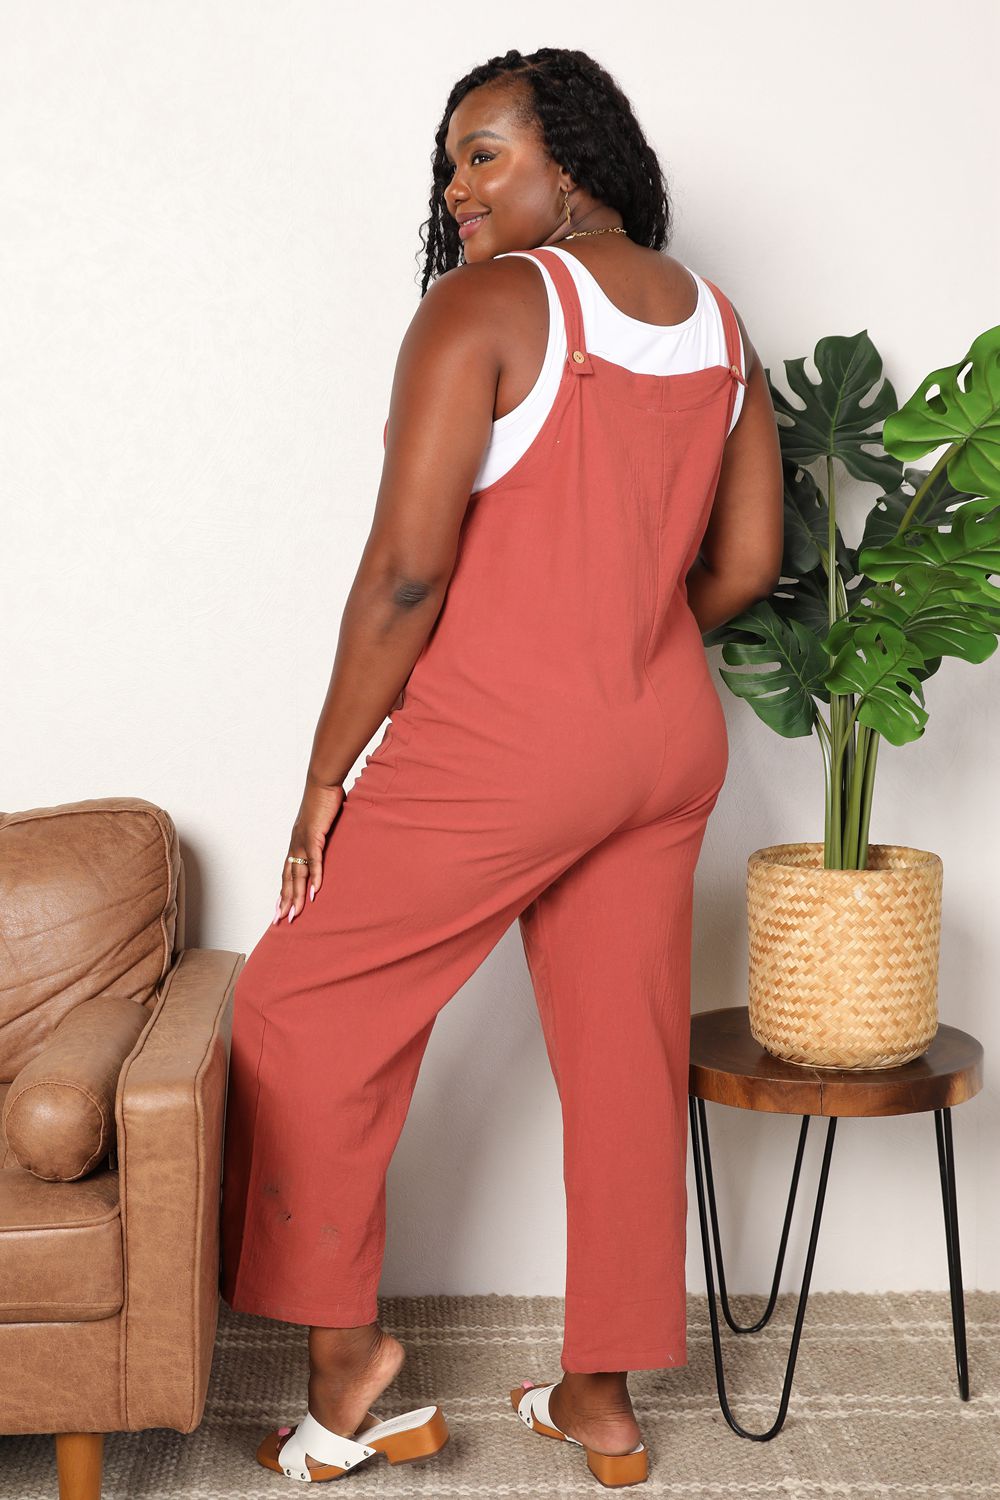 Red Orange - Double Take Wide Leg Overalls with Front Pockets - Sizes S-XL Ti Amo I love you